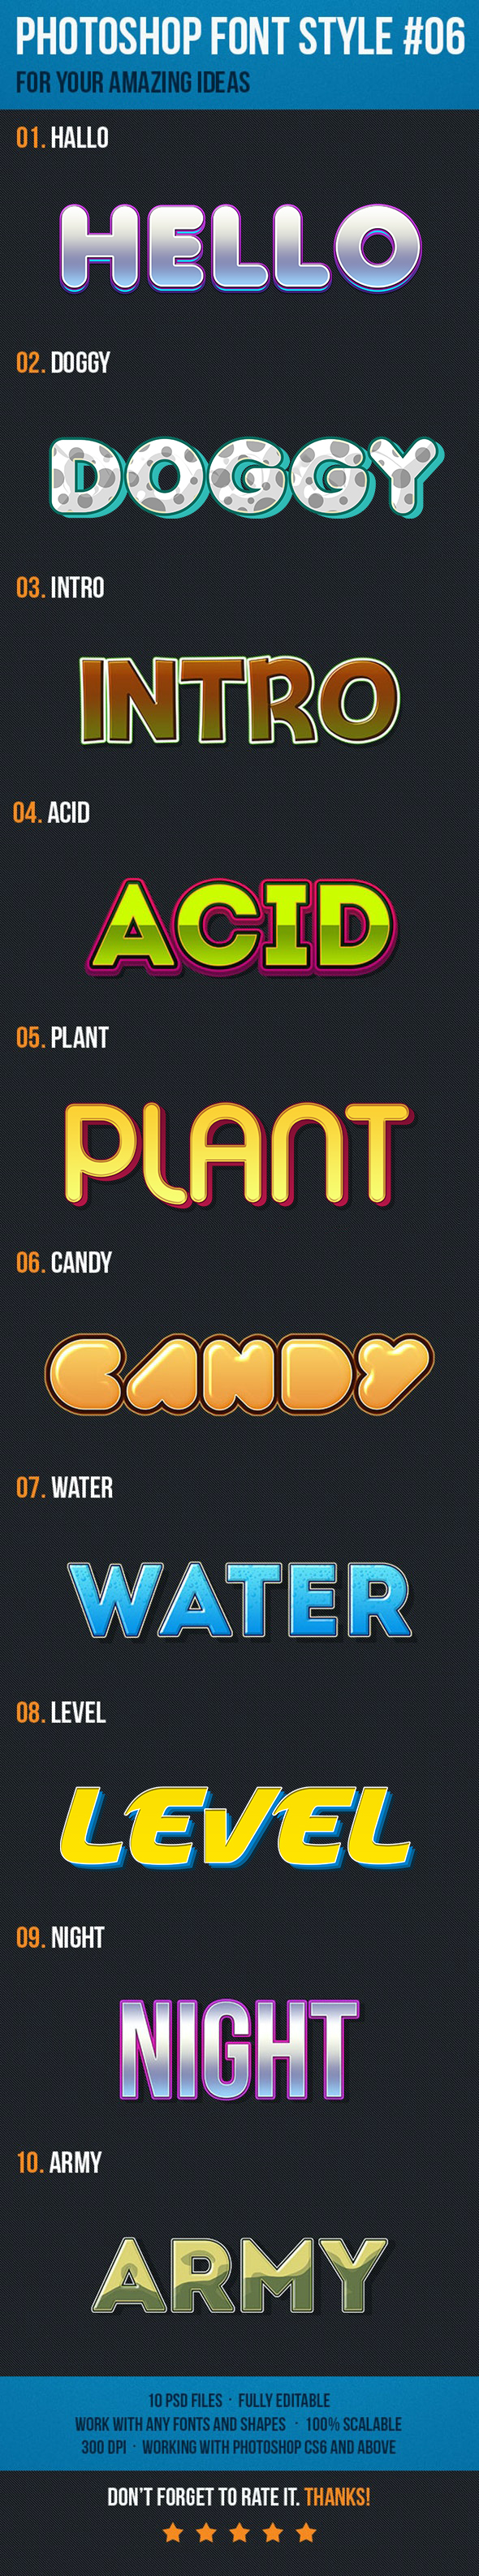 10 Font Style for Game Logo #06